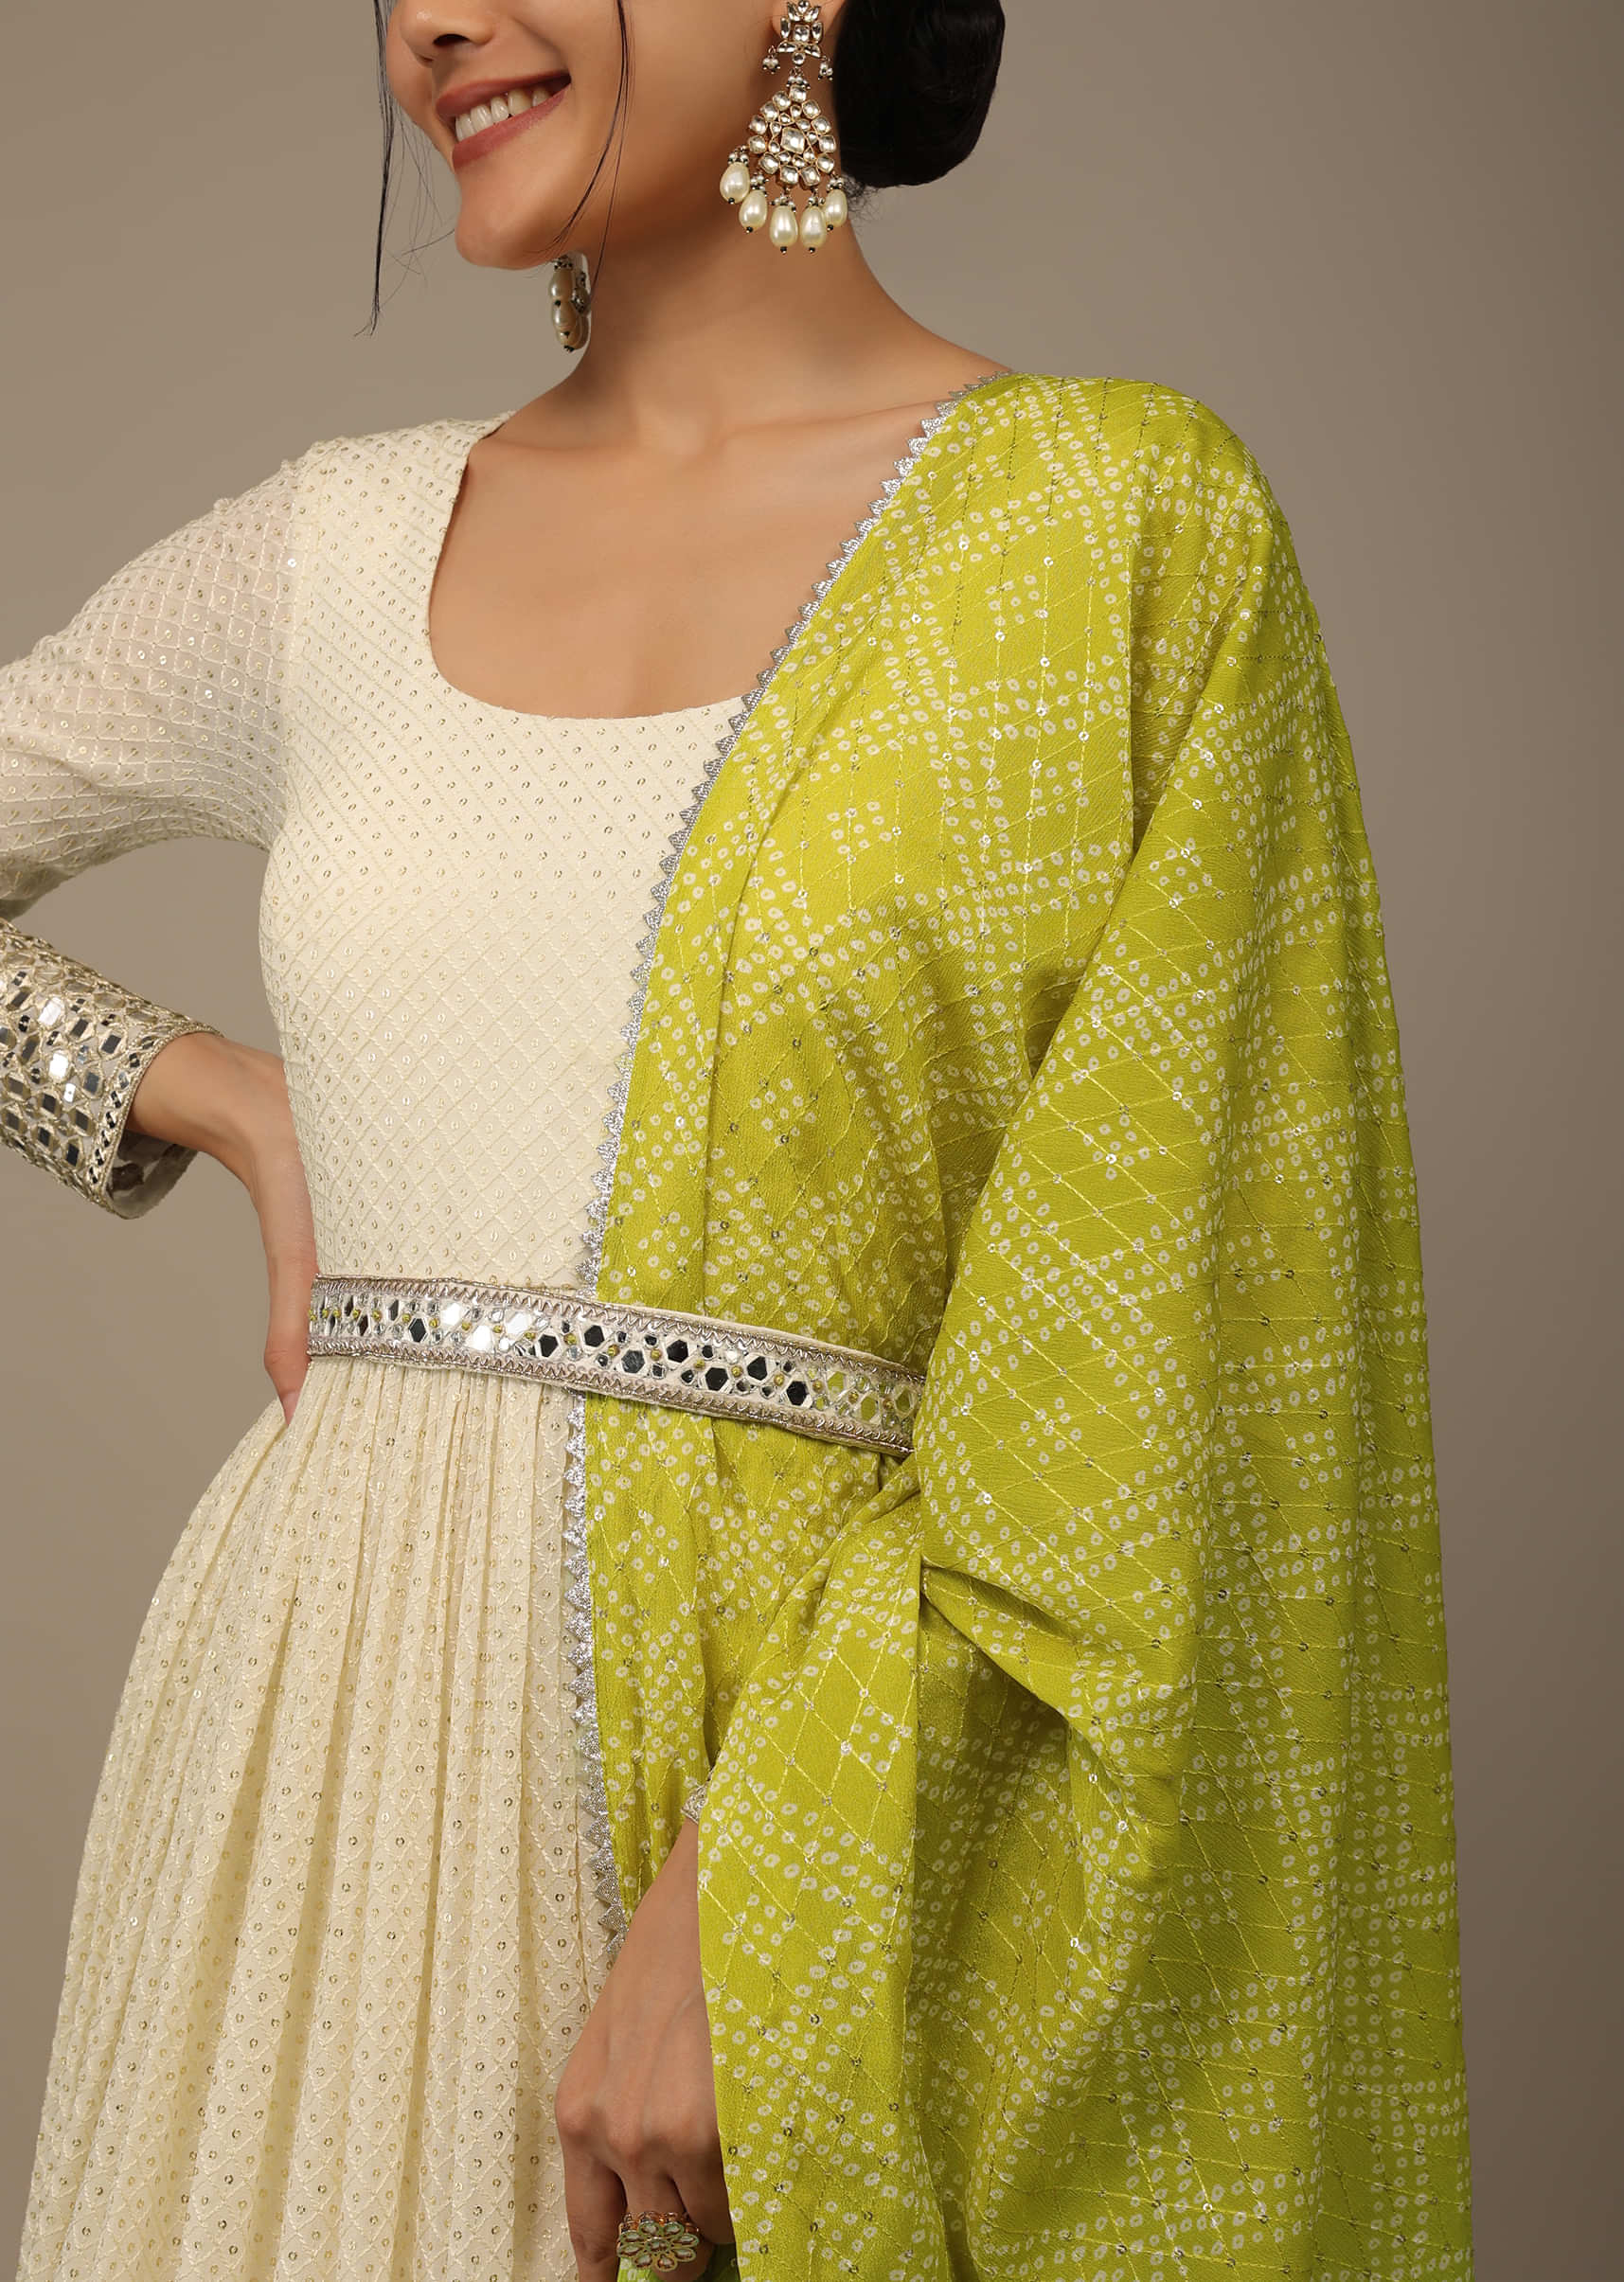 Daisy White Embroidered Anarkali Suit In Georgette With Yellow-Green Ombre Bandhani Dupatta